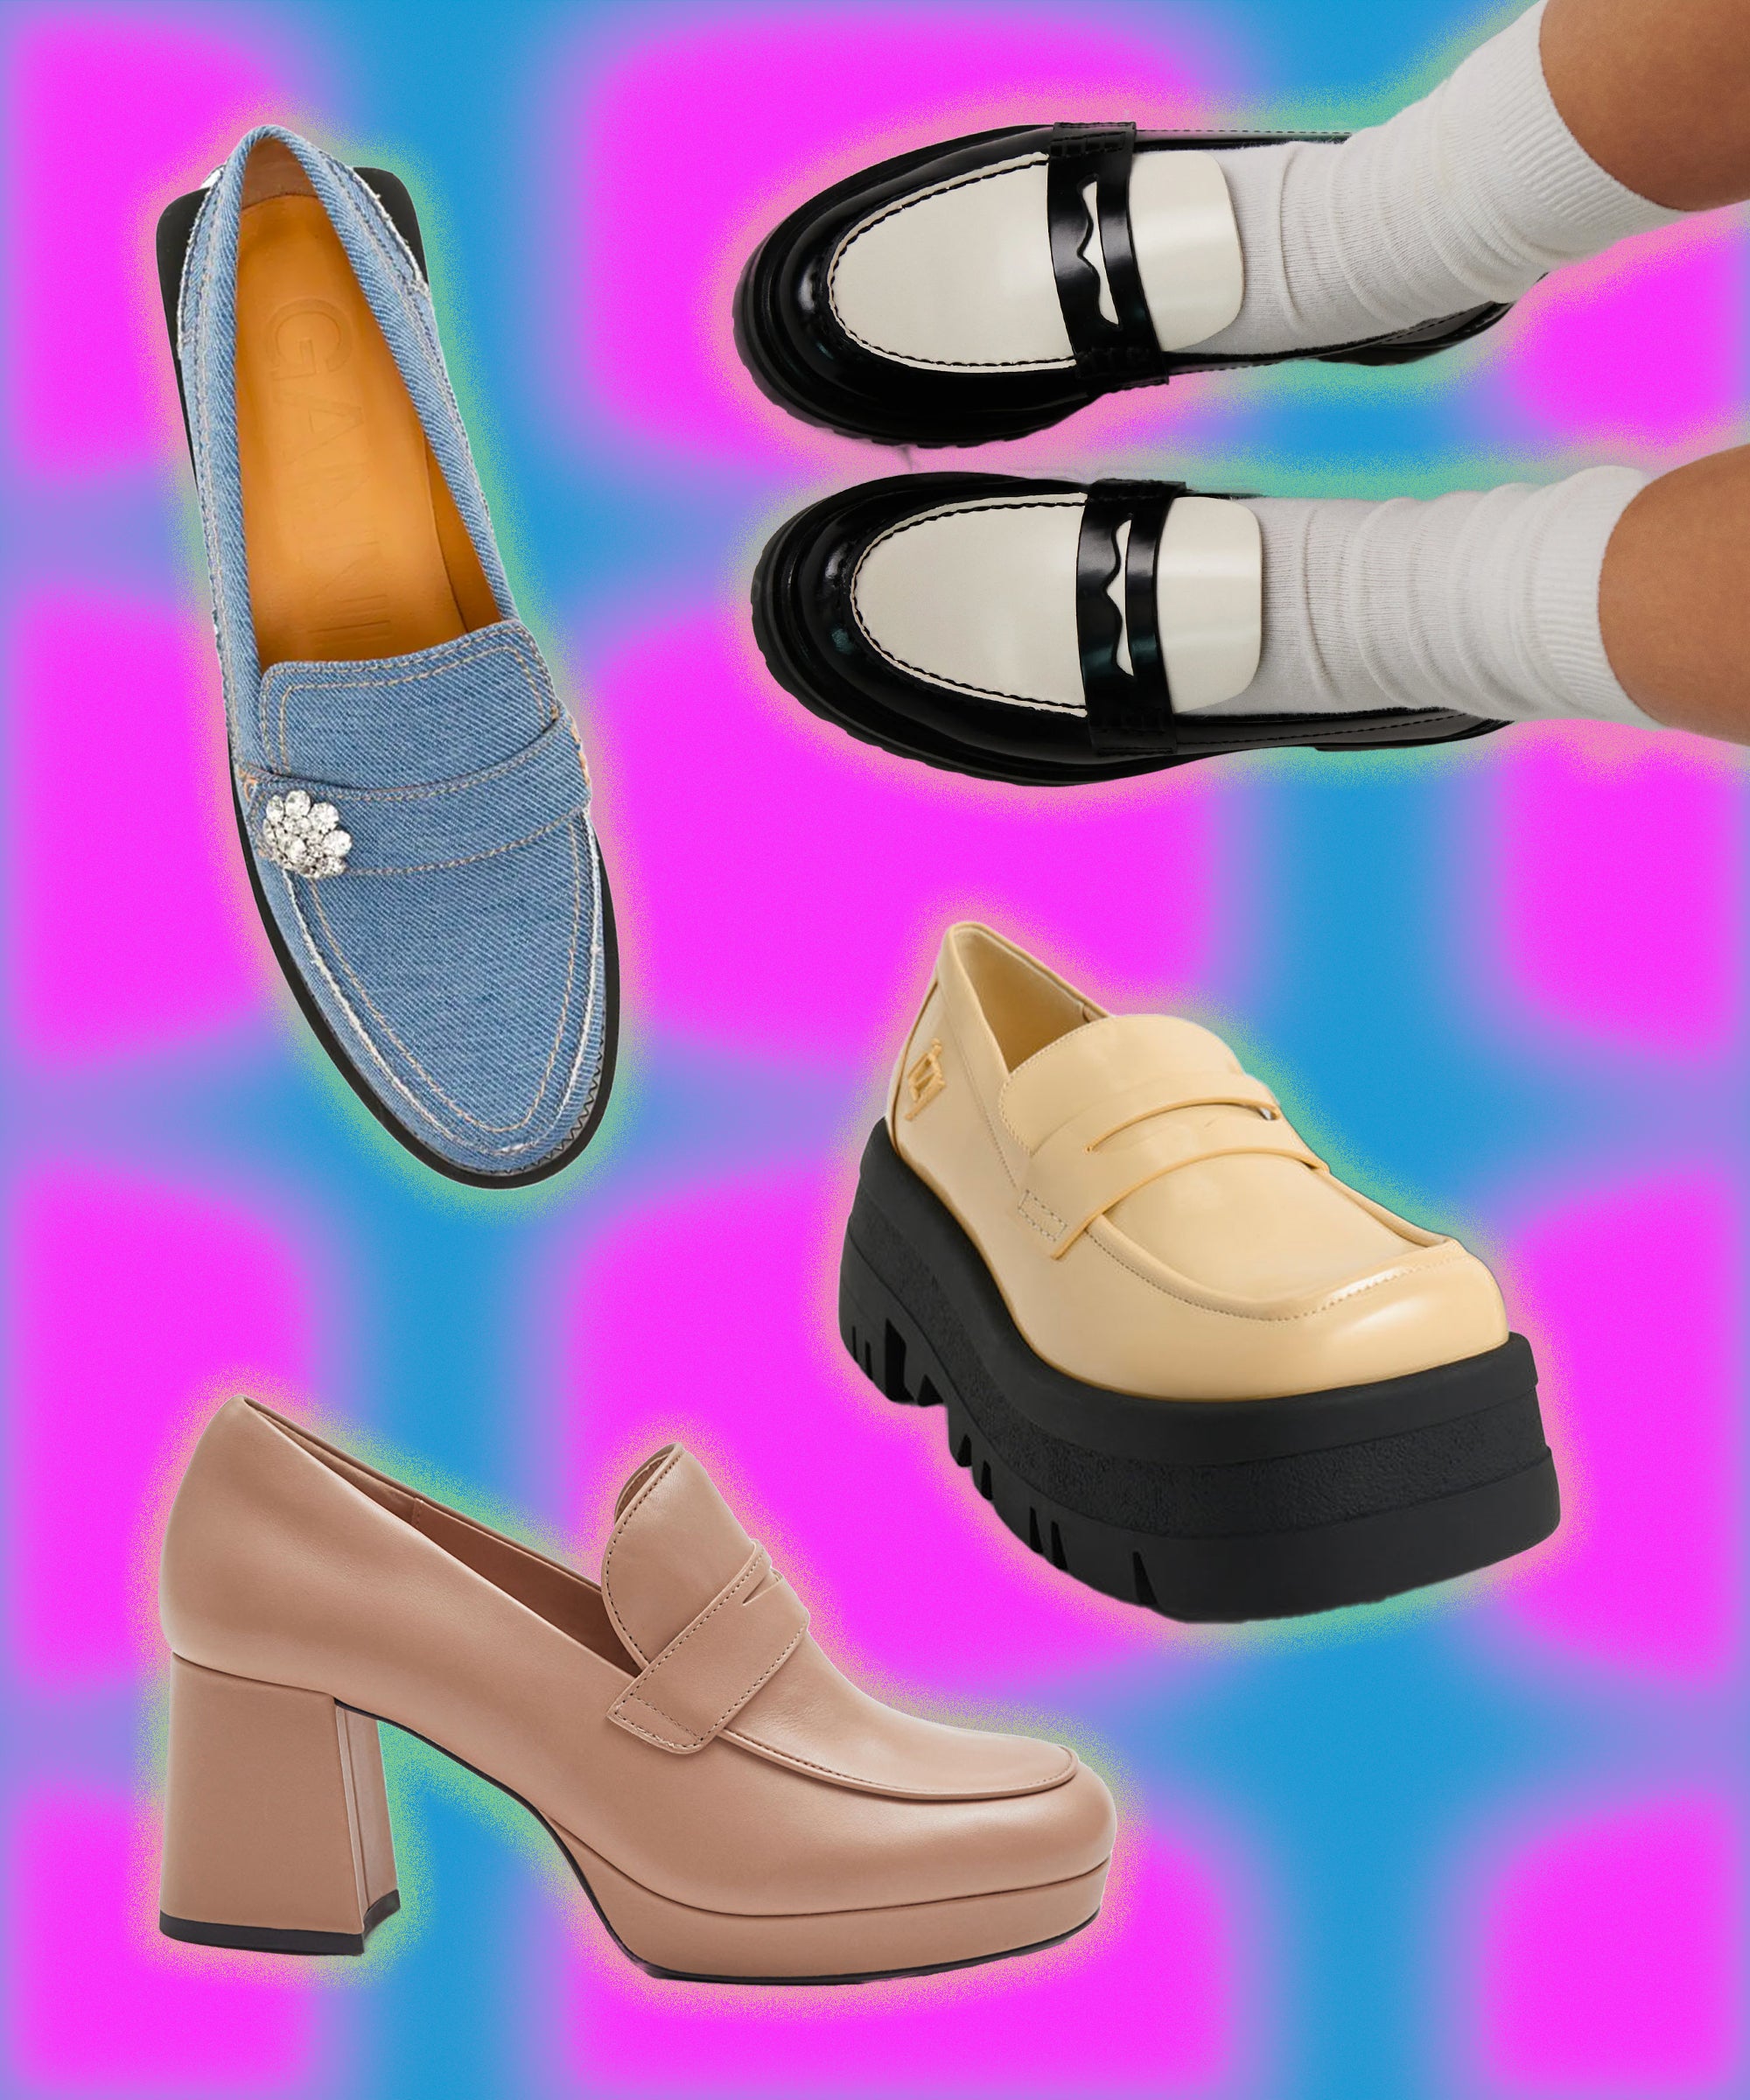 25 Pairs of On-Trend Fall Heels for Under $300 | Glamour